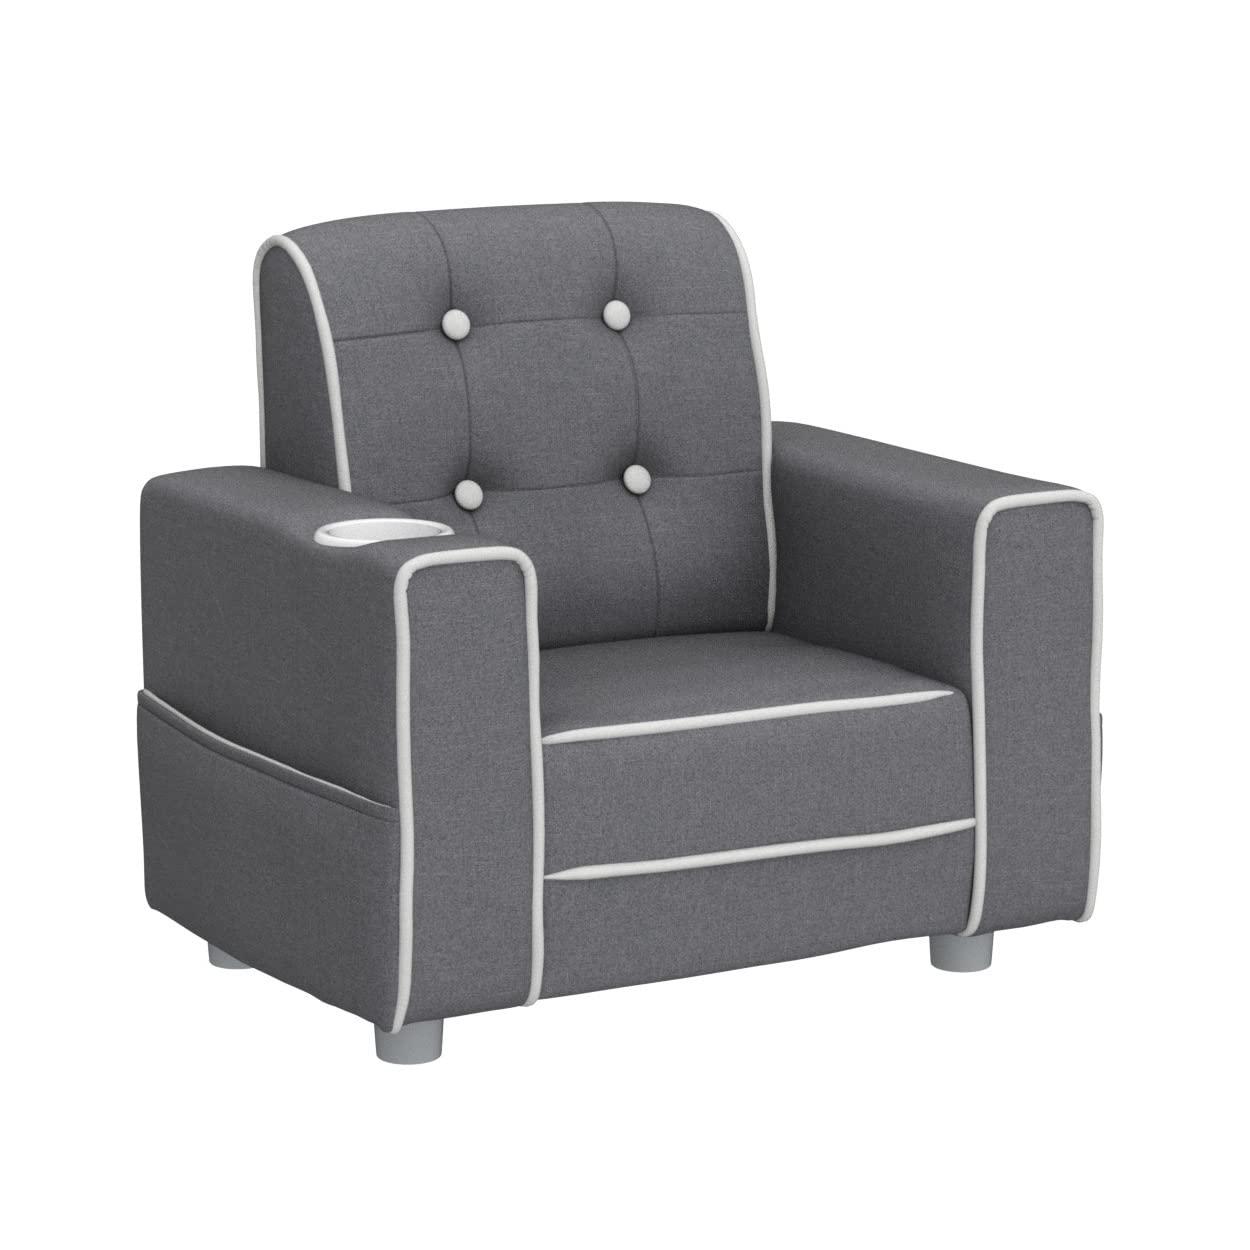 Chelsea Light Grey and White Upholstered Kids Chair with Cup Holder